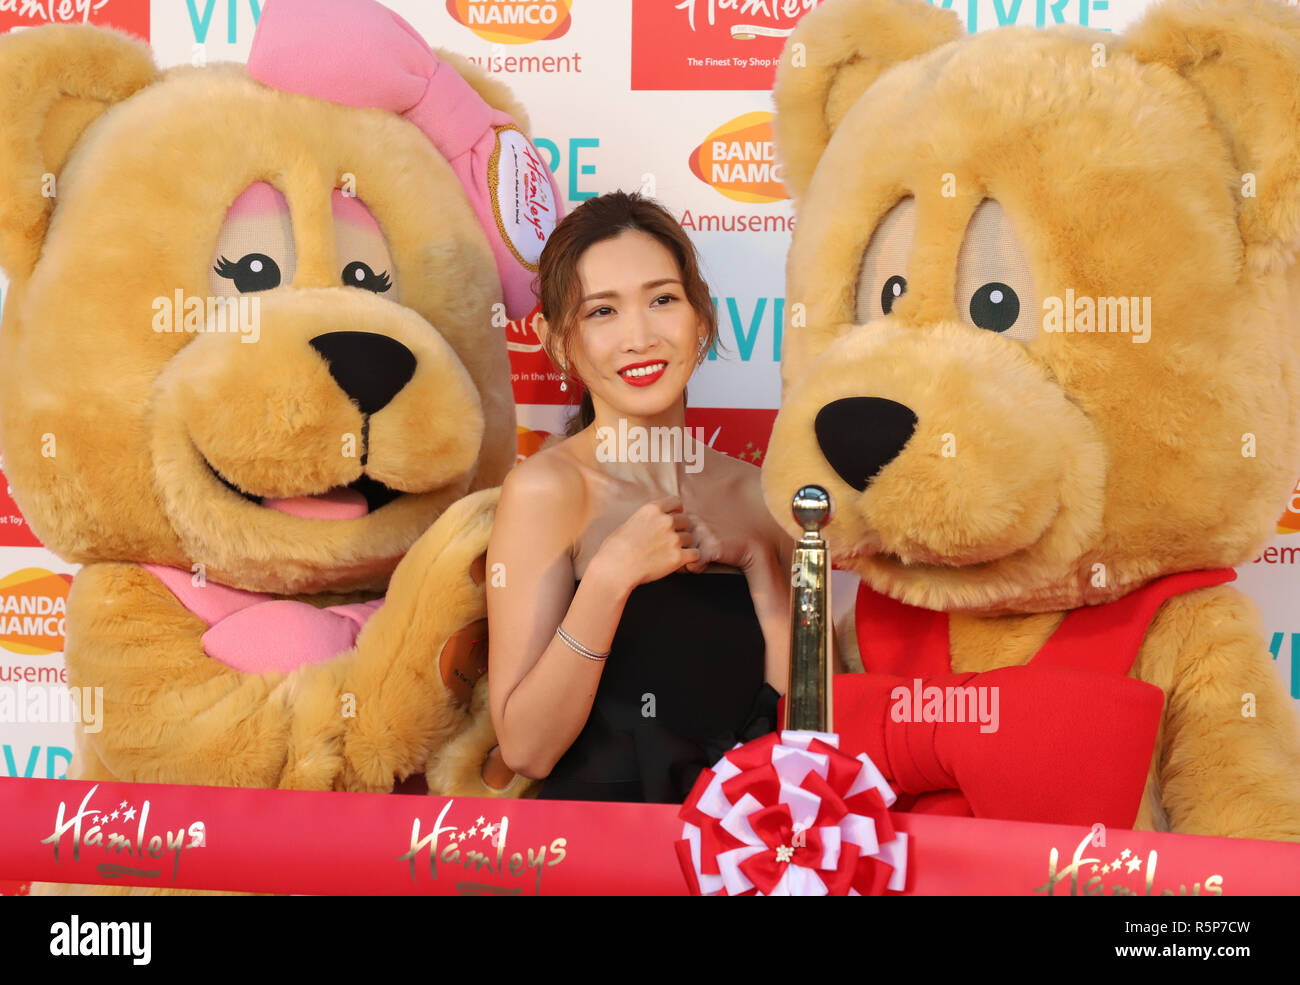 Friday. 30th Nov, 2018. November 30 2018, Yokohama, Japan - Japanese model Saeko smiles with teddy bears as she attends the opening ceremony of British toy store chain Hamleys' first shop in Japan in Yokohama, suburban Tokyo on Friday, November 30, 2018. London's largest and oldest toy store Hamleys opened a 3,000 square meters large shop in Yokohama's shopping mall World Porters. Credit: Yoshio Tsunoda/AFLO/Alamy Live News Stock Photo